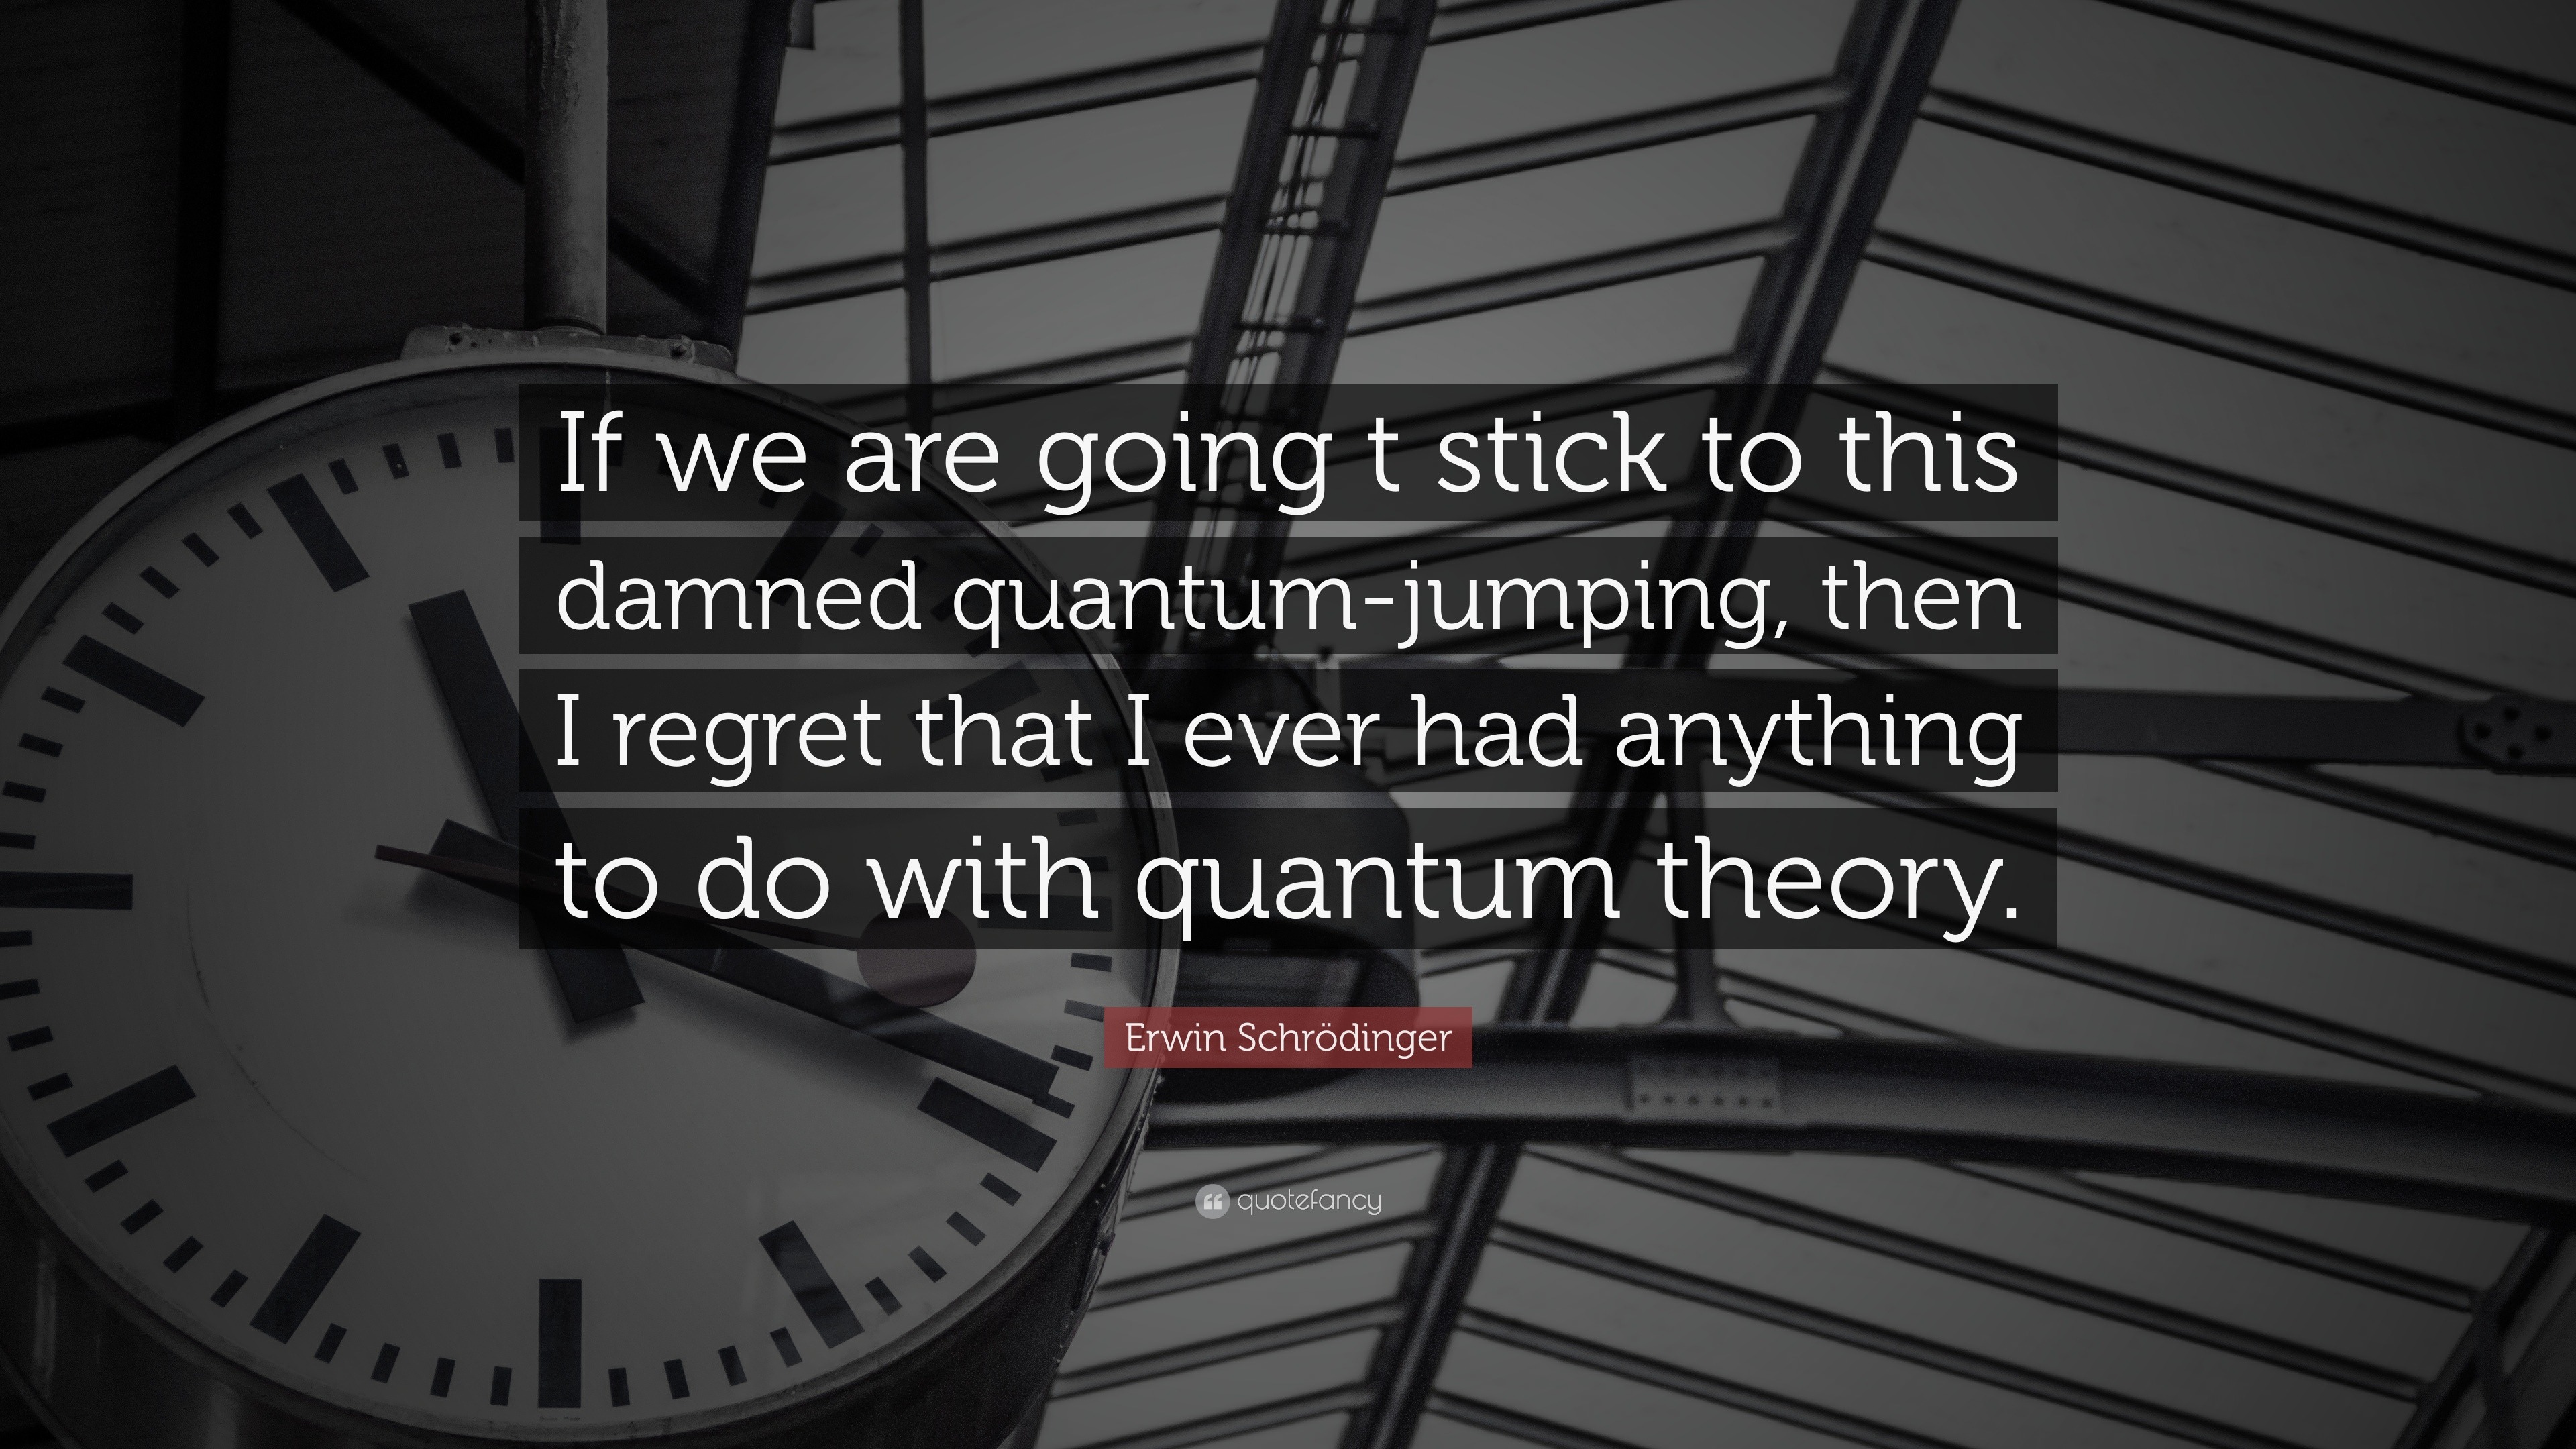 Erwin Schrödinger Quote “If we are going t stick to this damned quantum